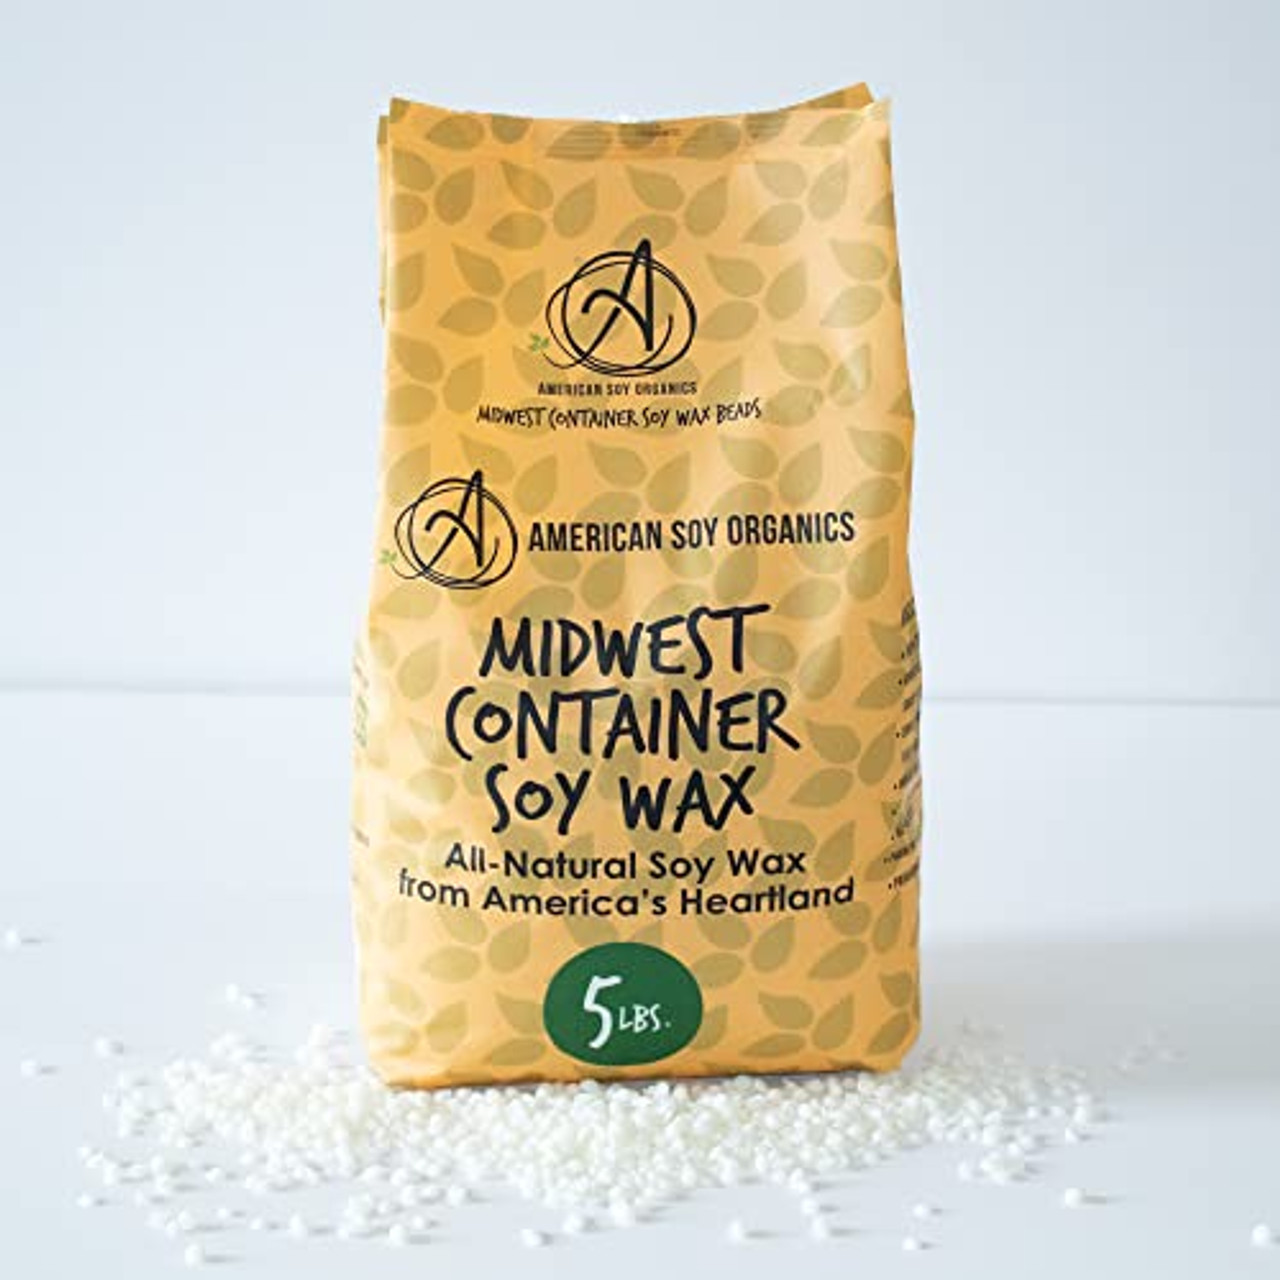 Millennium Soy Wax (With free shipping)